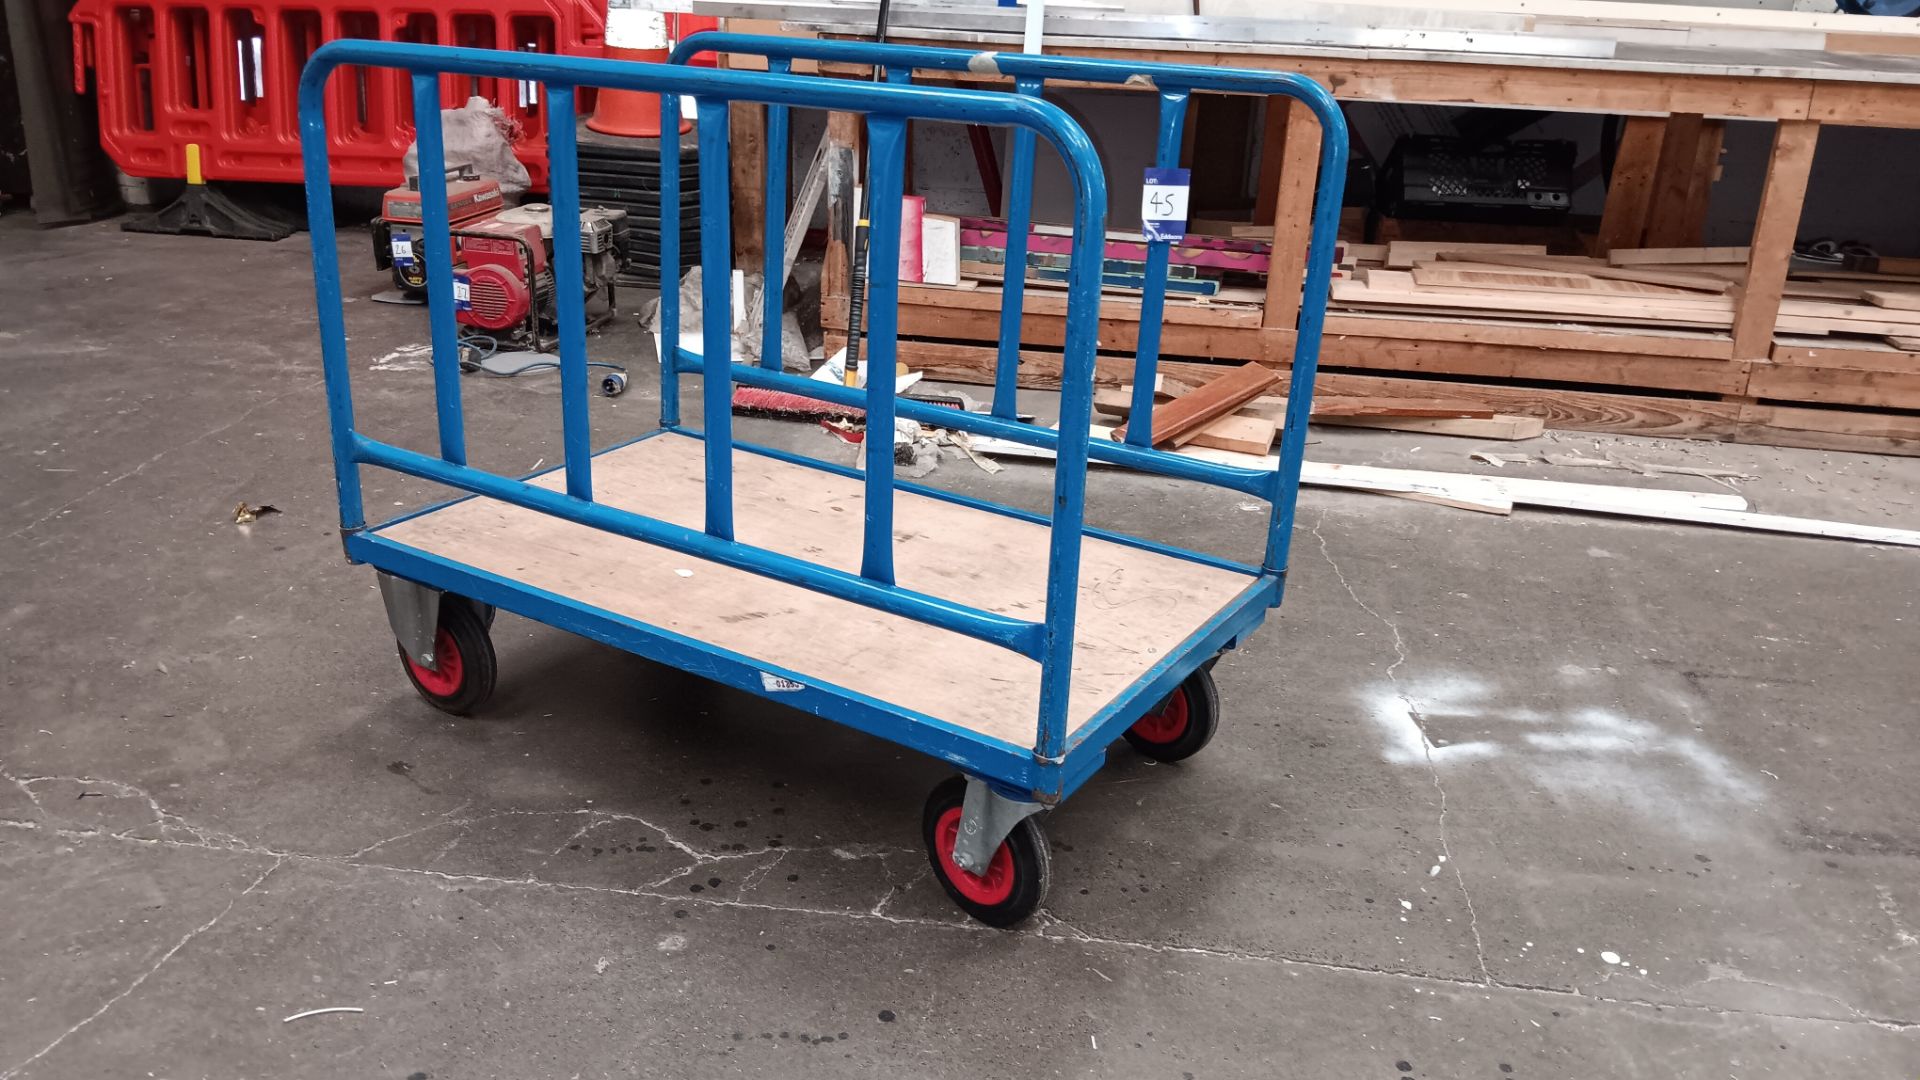 2 sided platform truck with plywood base – Located in Unit 3 - Image 2 of 2